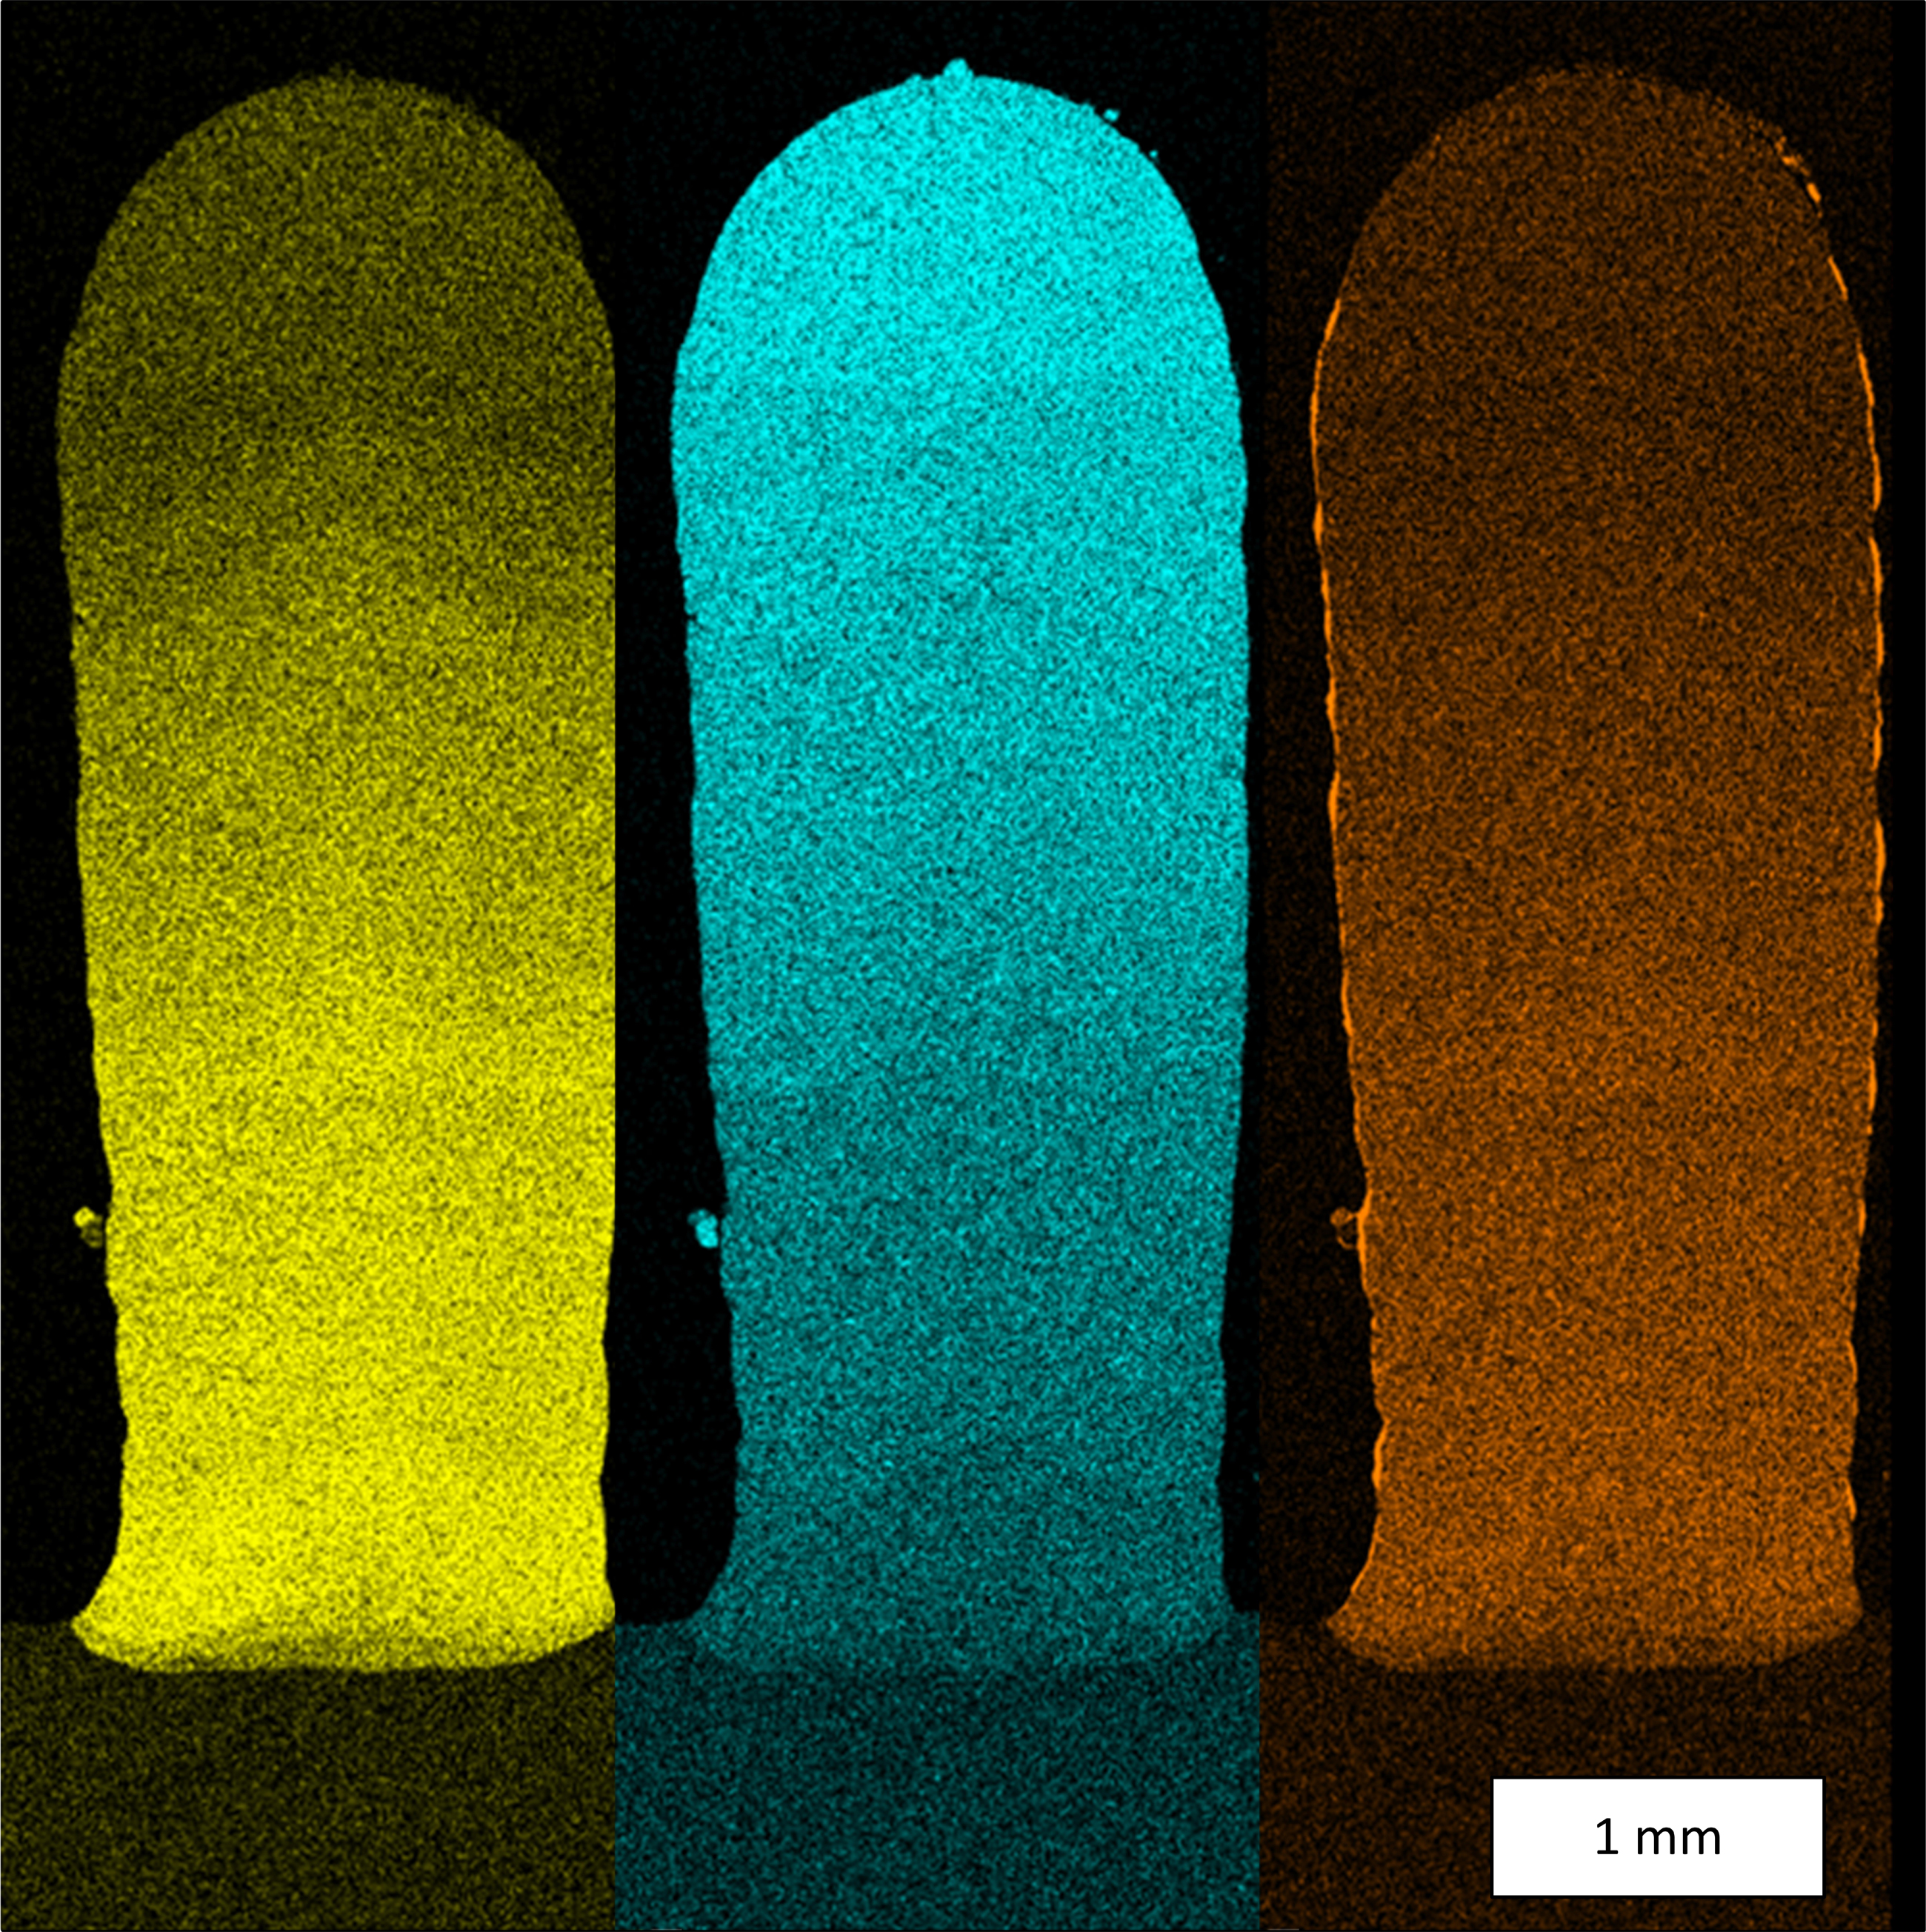 EDX-Mapping: The chemical analysis of a test geometry proves the material transition. The colors illustrate the continuous transition from the cobalt-based alloy Merl72 to the nickel-based superalloy IN 718 (yellow: cobalt, blue: nickel, orange: aluminum).